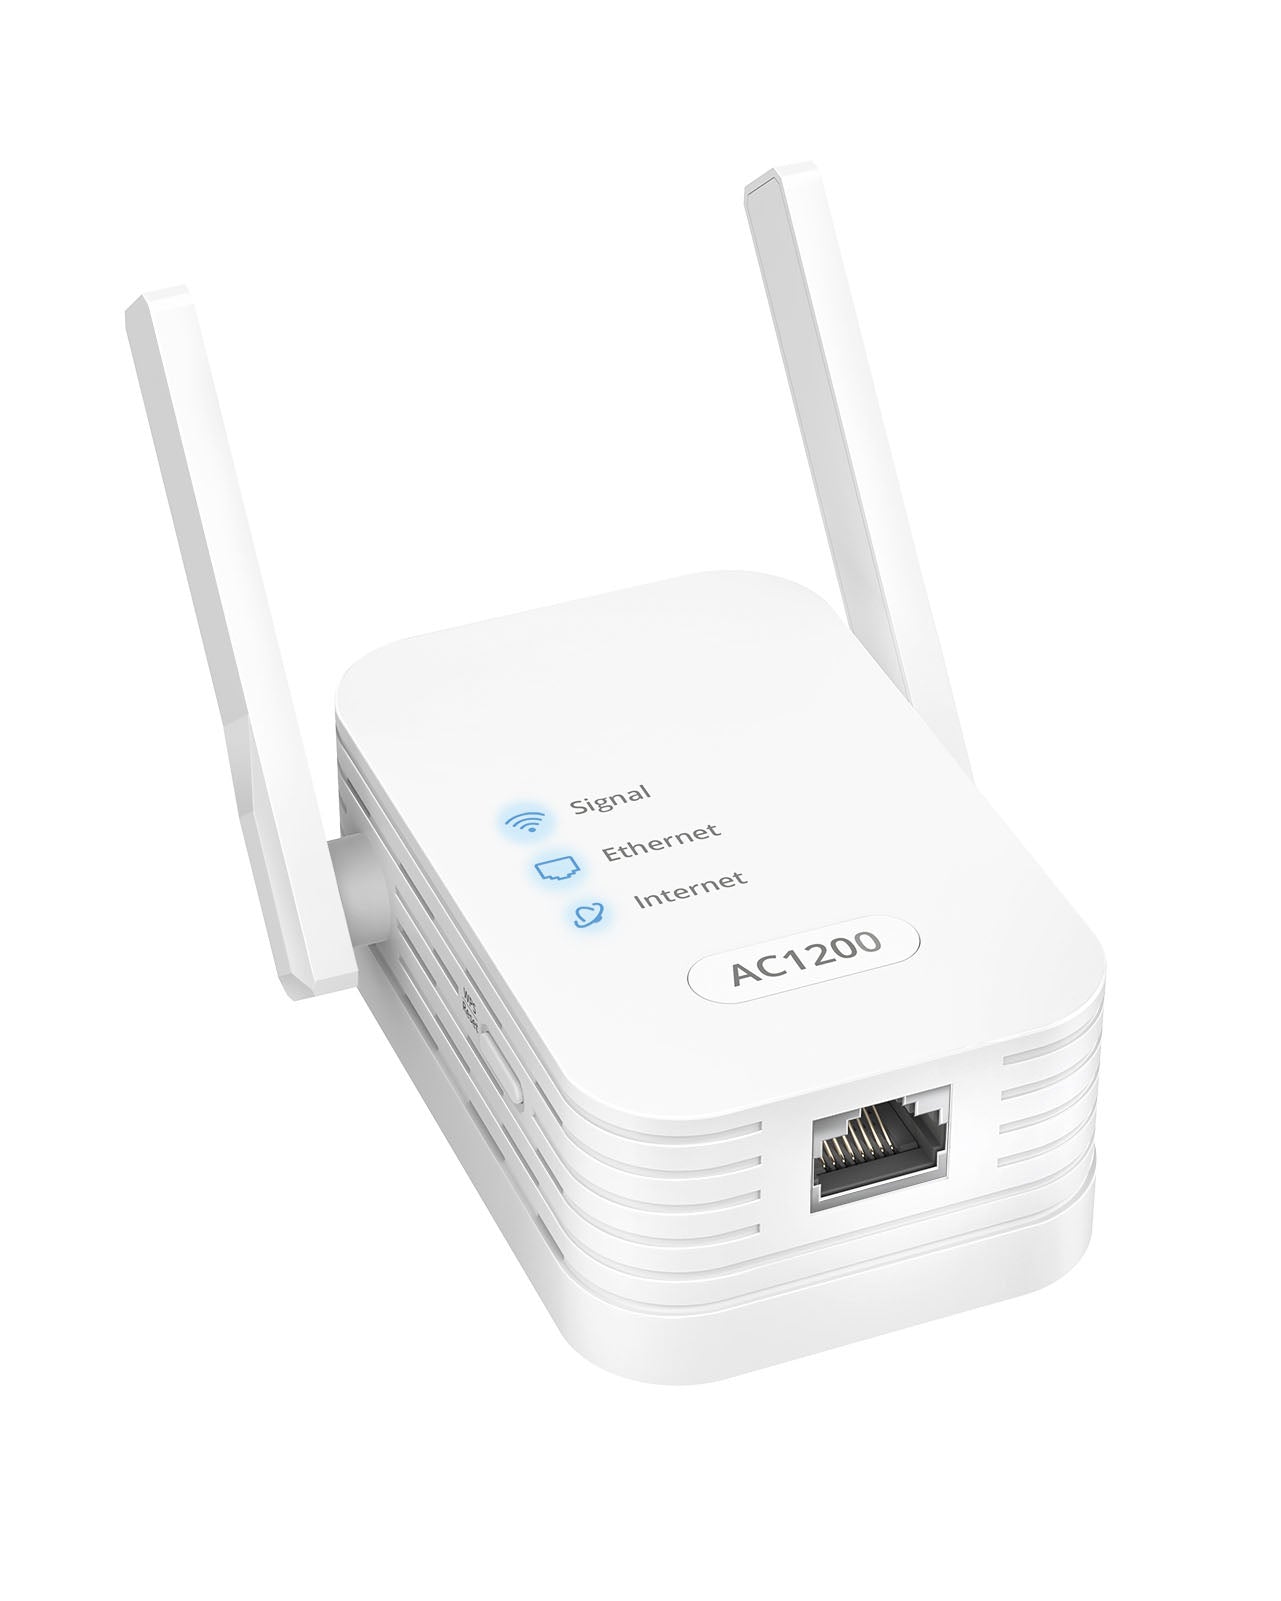 AC1200 WiFi to Ethernet Adapter Supports 5GHz WiFi Connection with Your Router Comes with 100 Mbps Ethernet Port